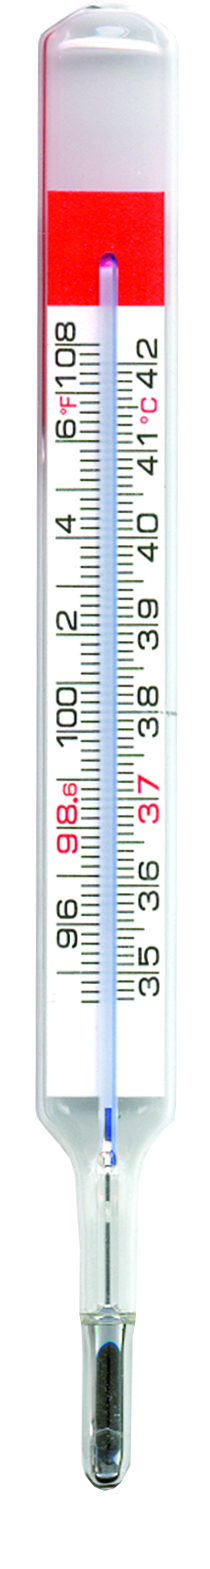 Clinical Thermometers Patient Temperature Management Products And Solutions